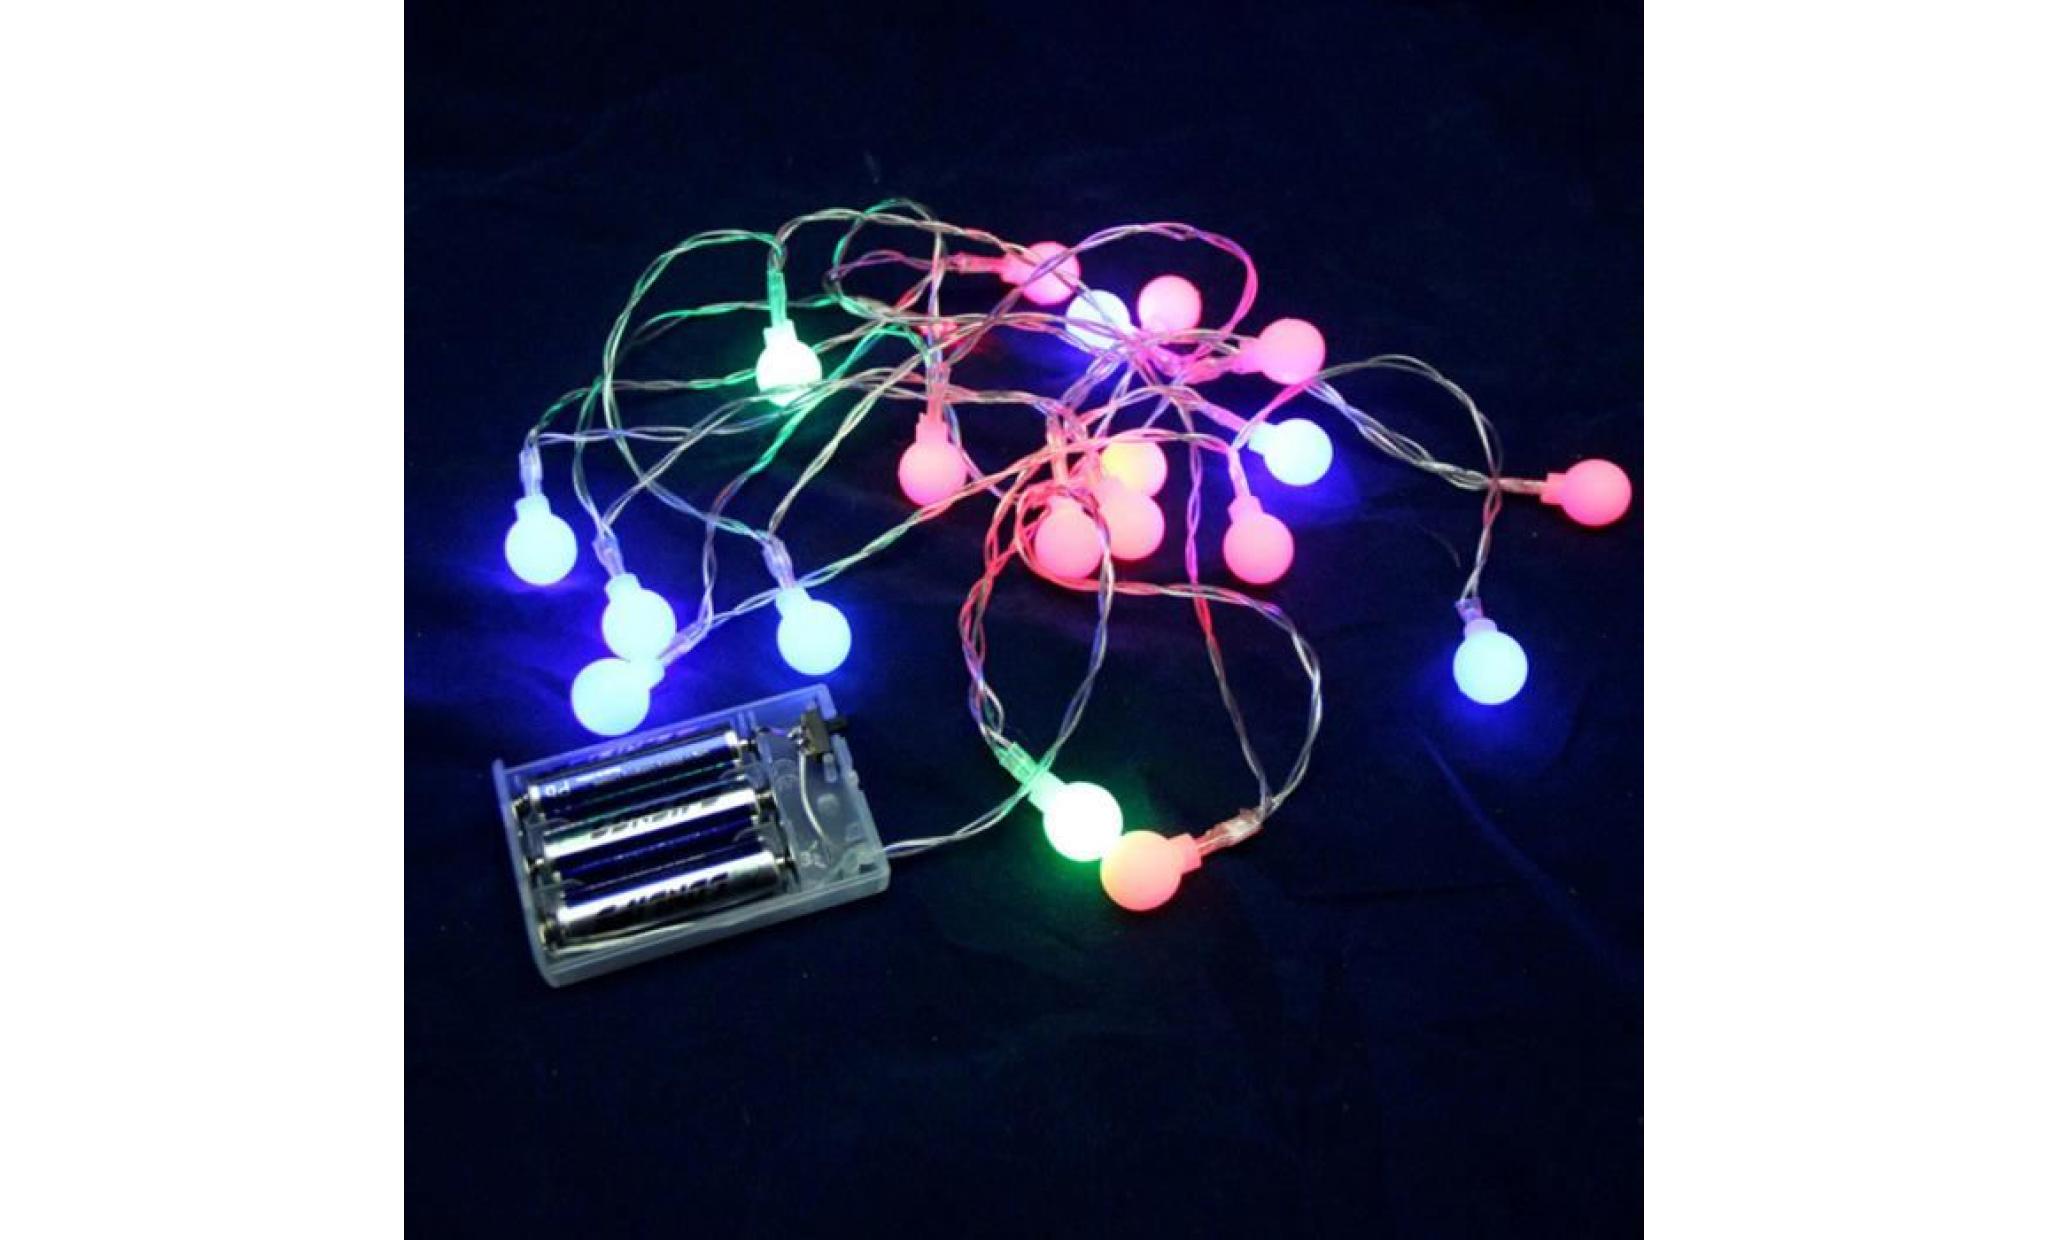 fairy string light ball shaped curtain lamp party wedding outdoor decor mr qinhig1171 pas cher